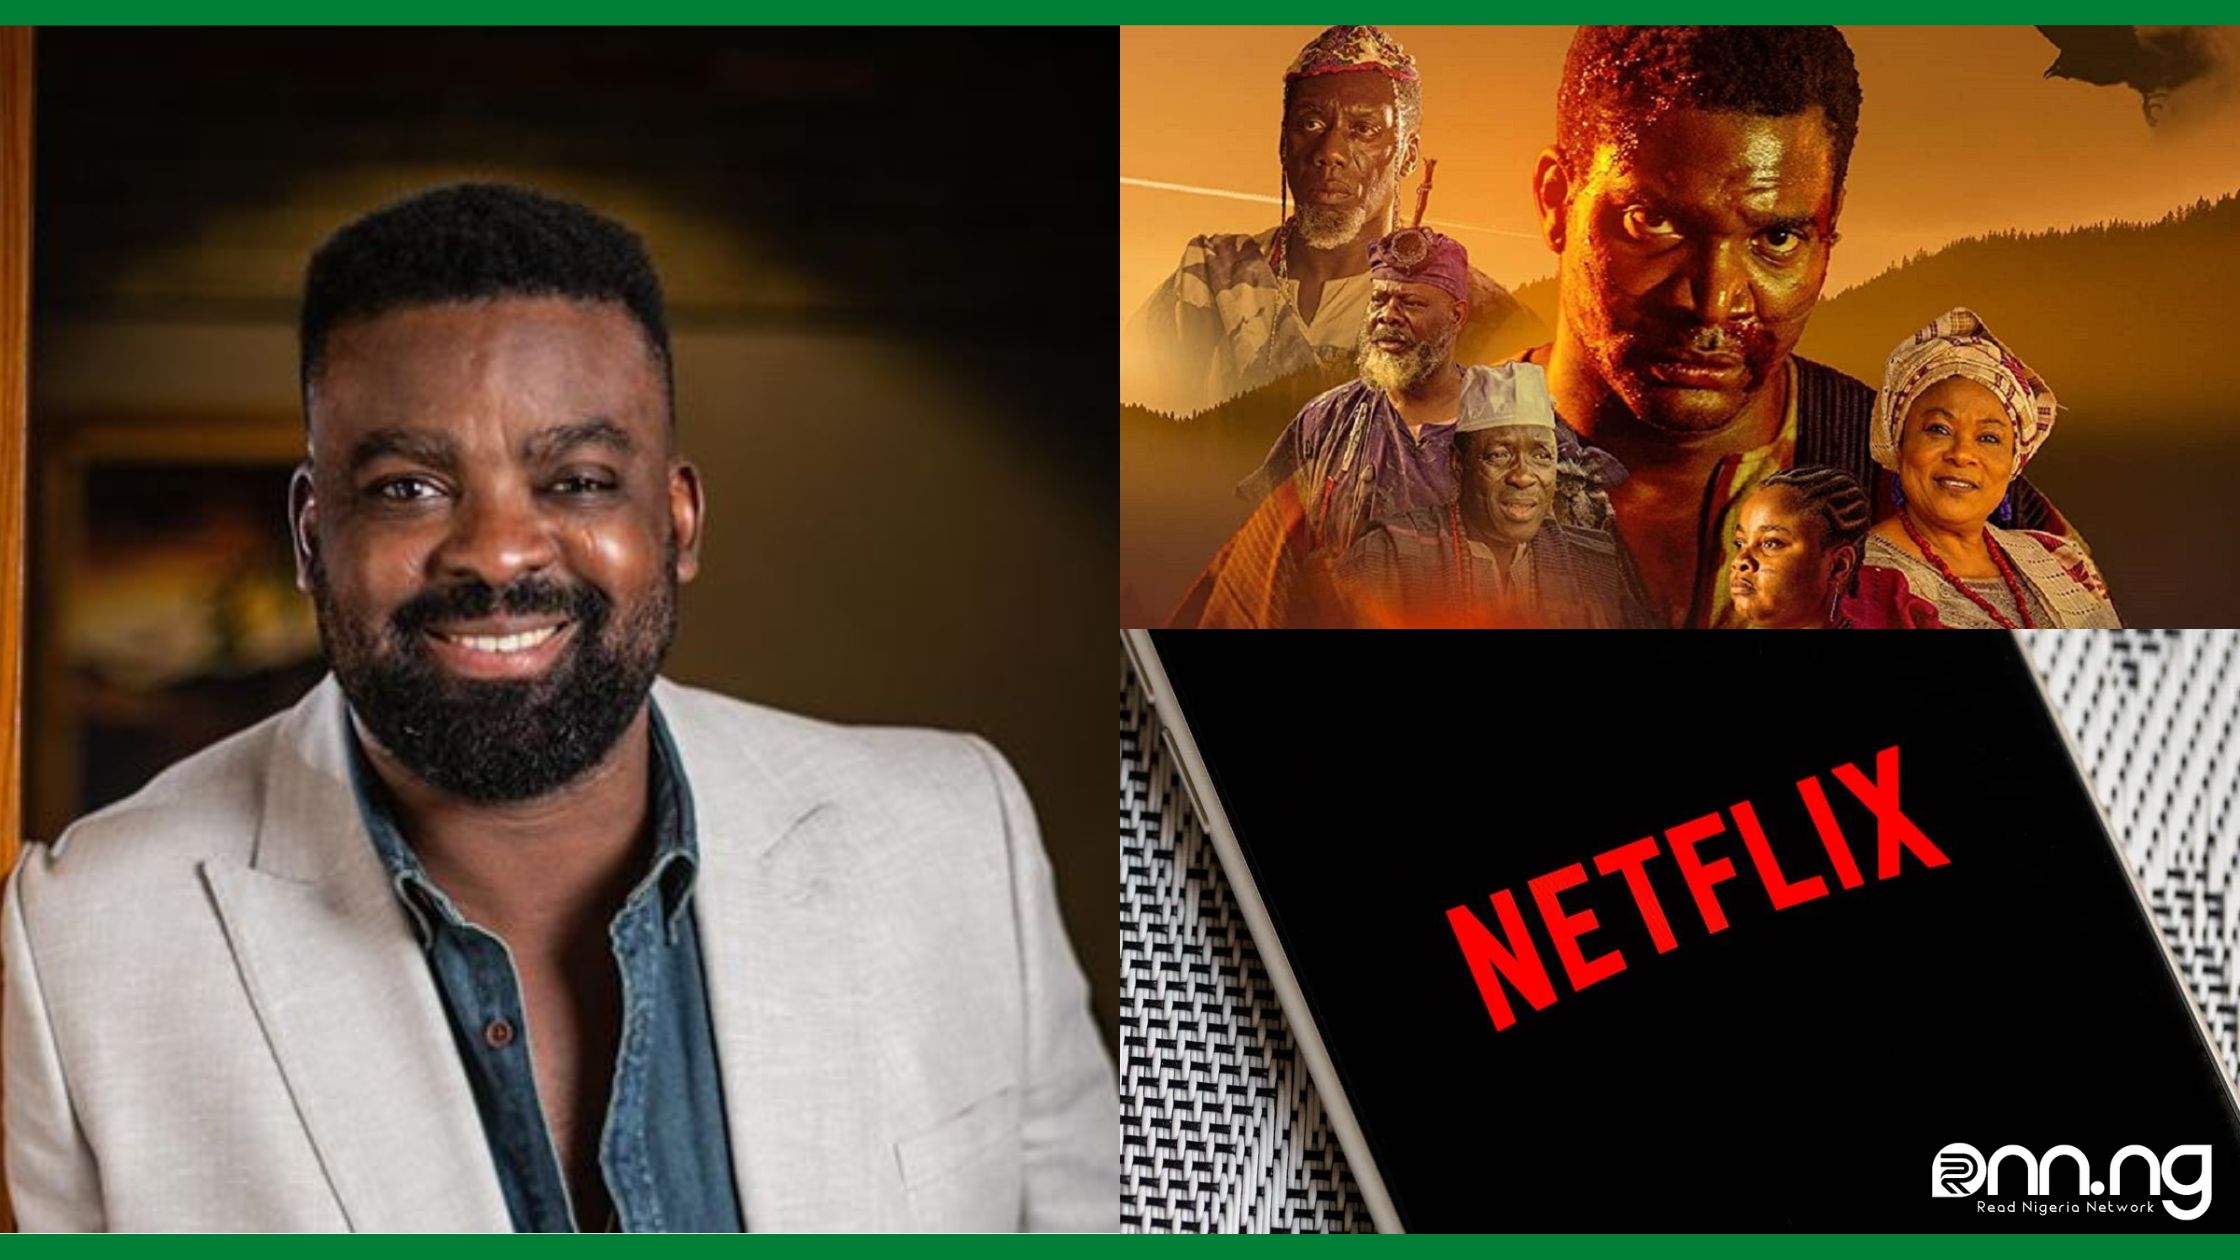 Kunle Afolayan Dreams Big Says He Knew 'Anikulapo' Would Be Bigger than 'Game of Thrones'